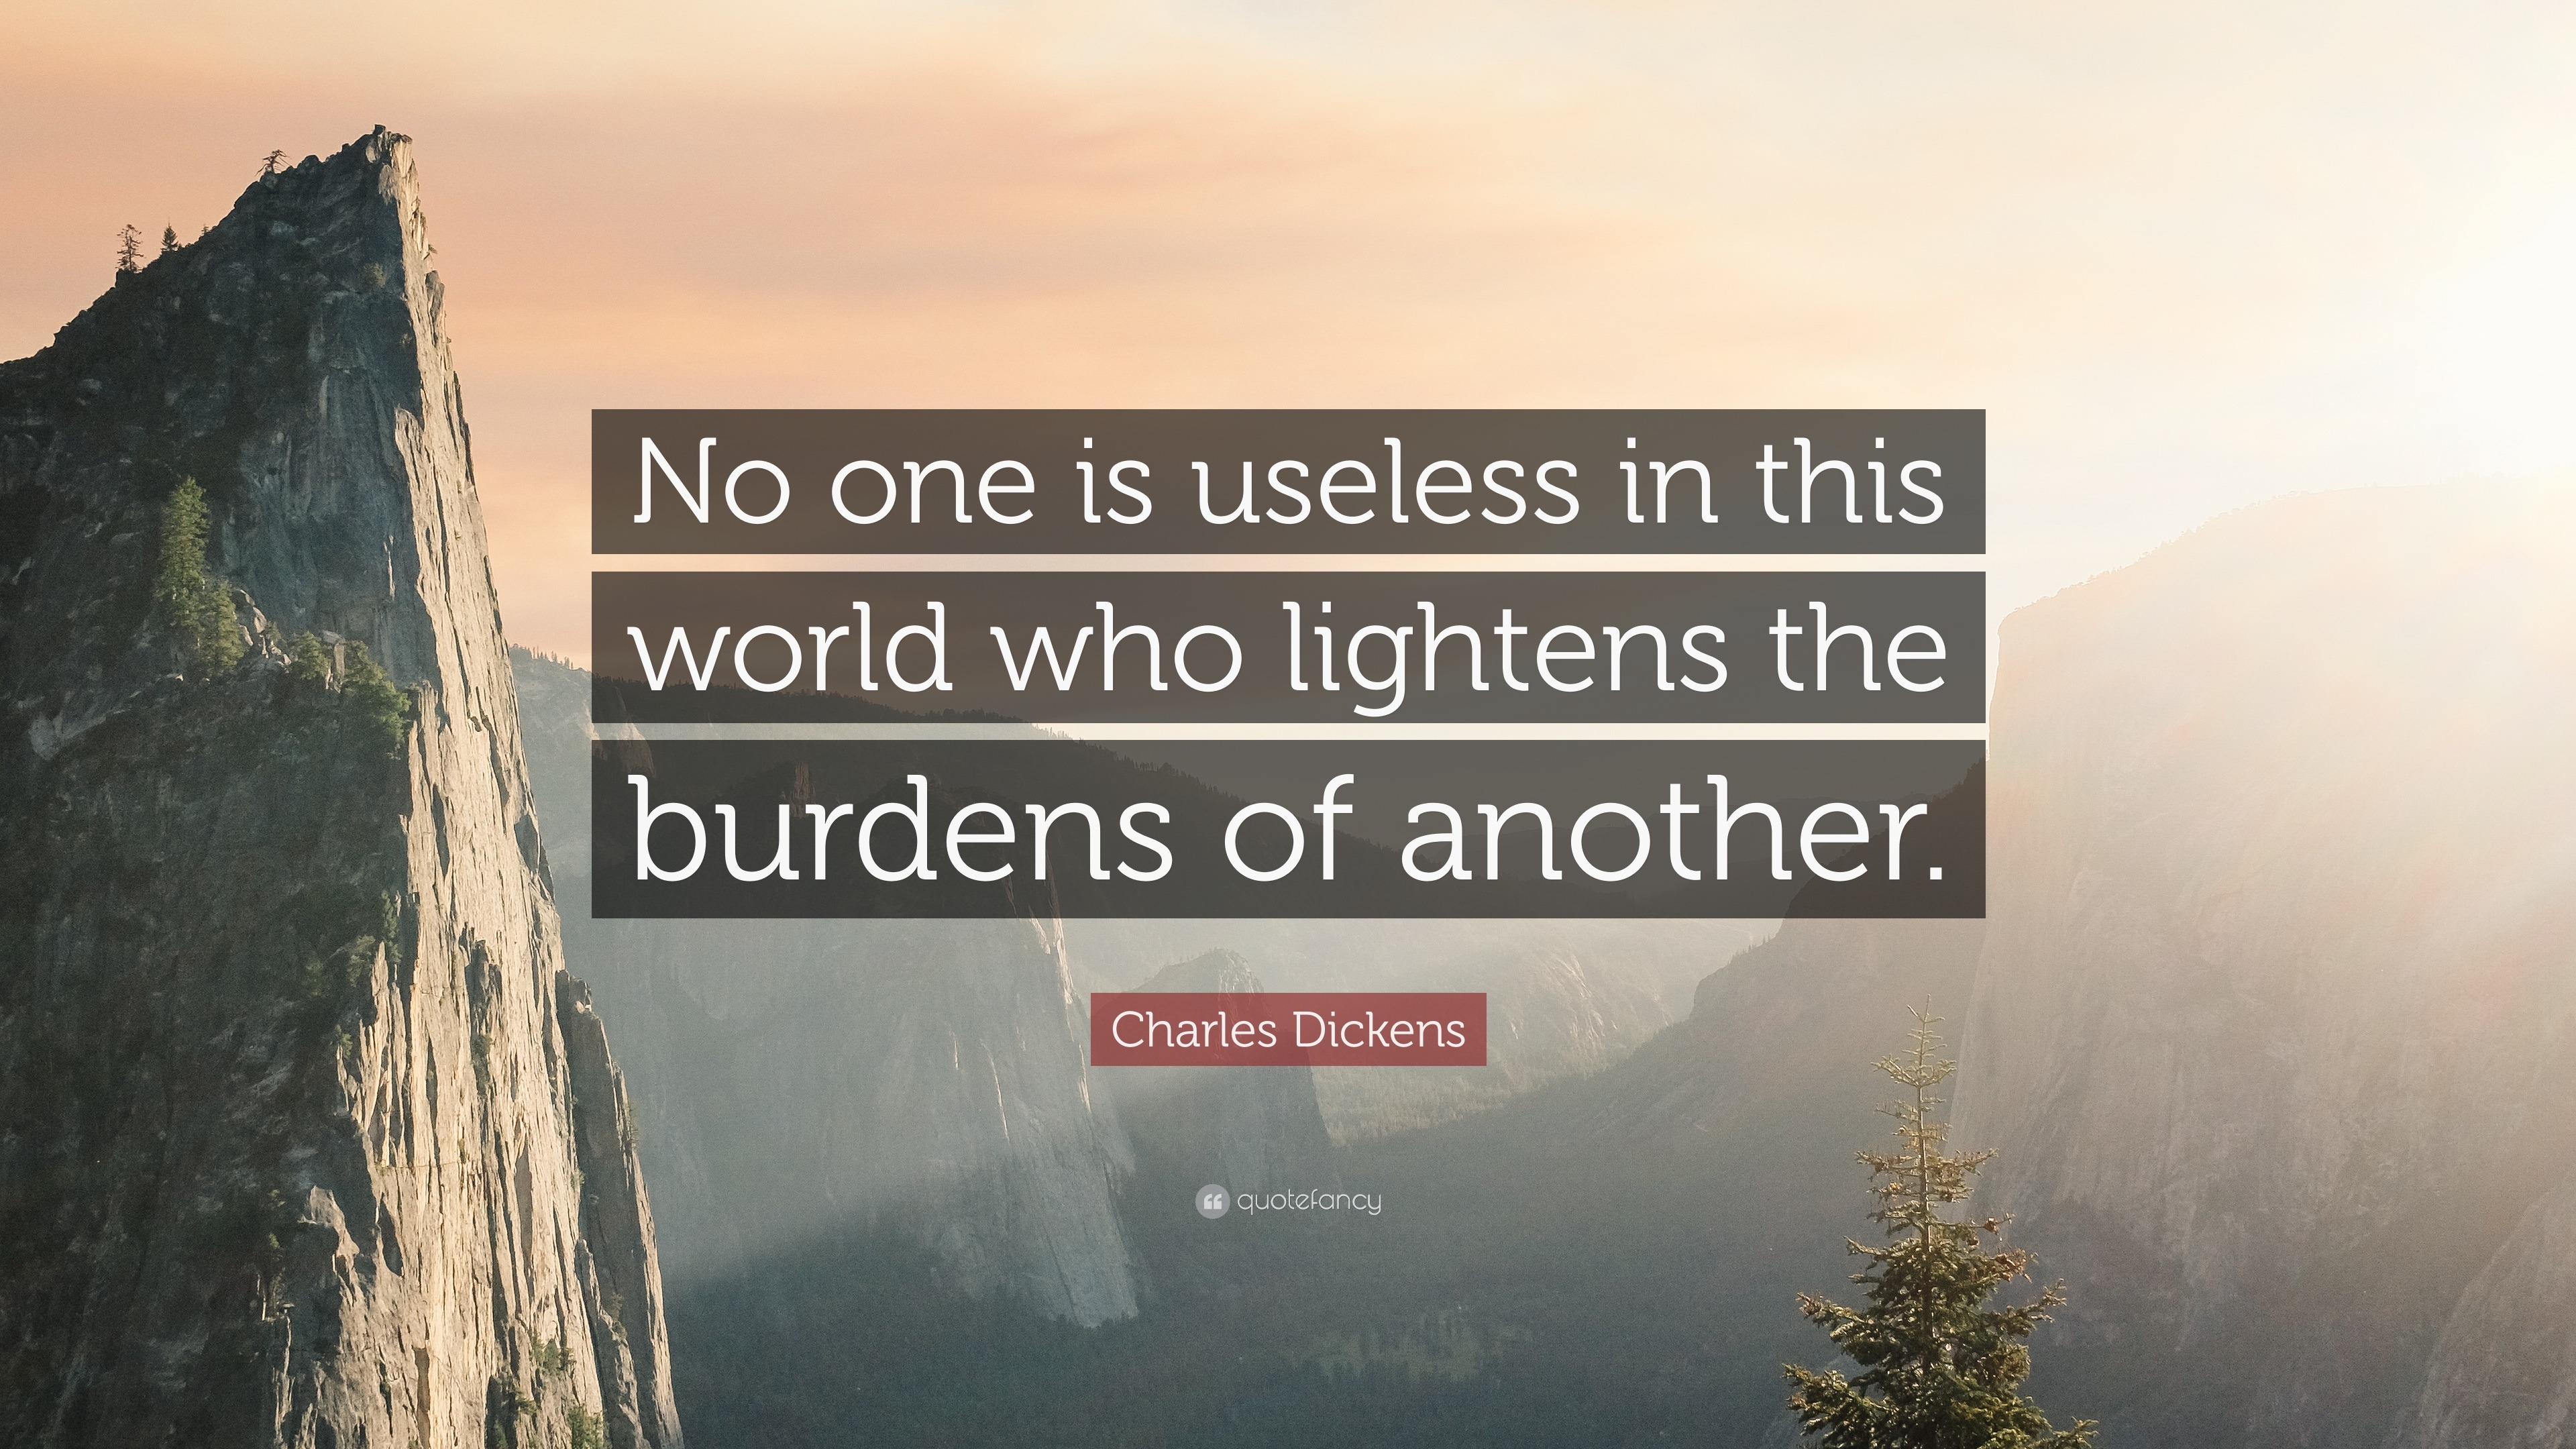 Charles Dickens Quote “No one is useless in this world